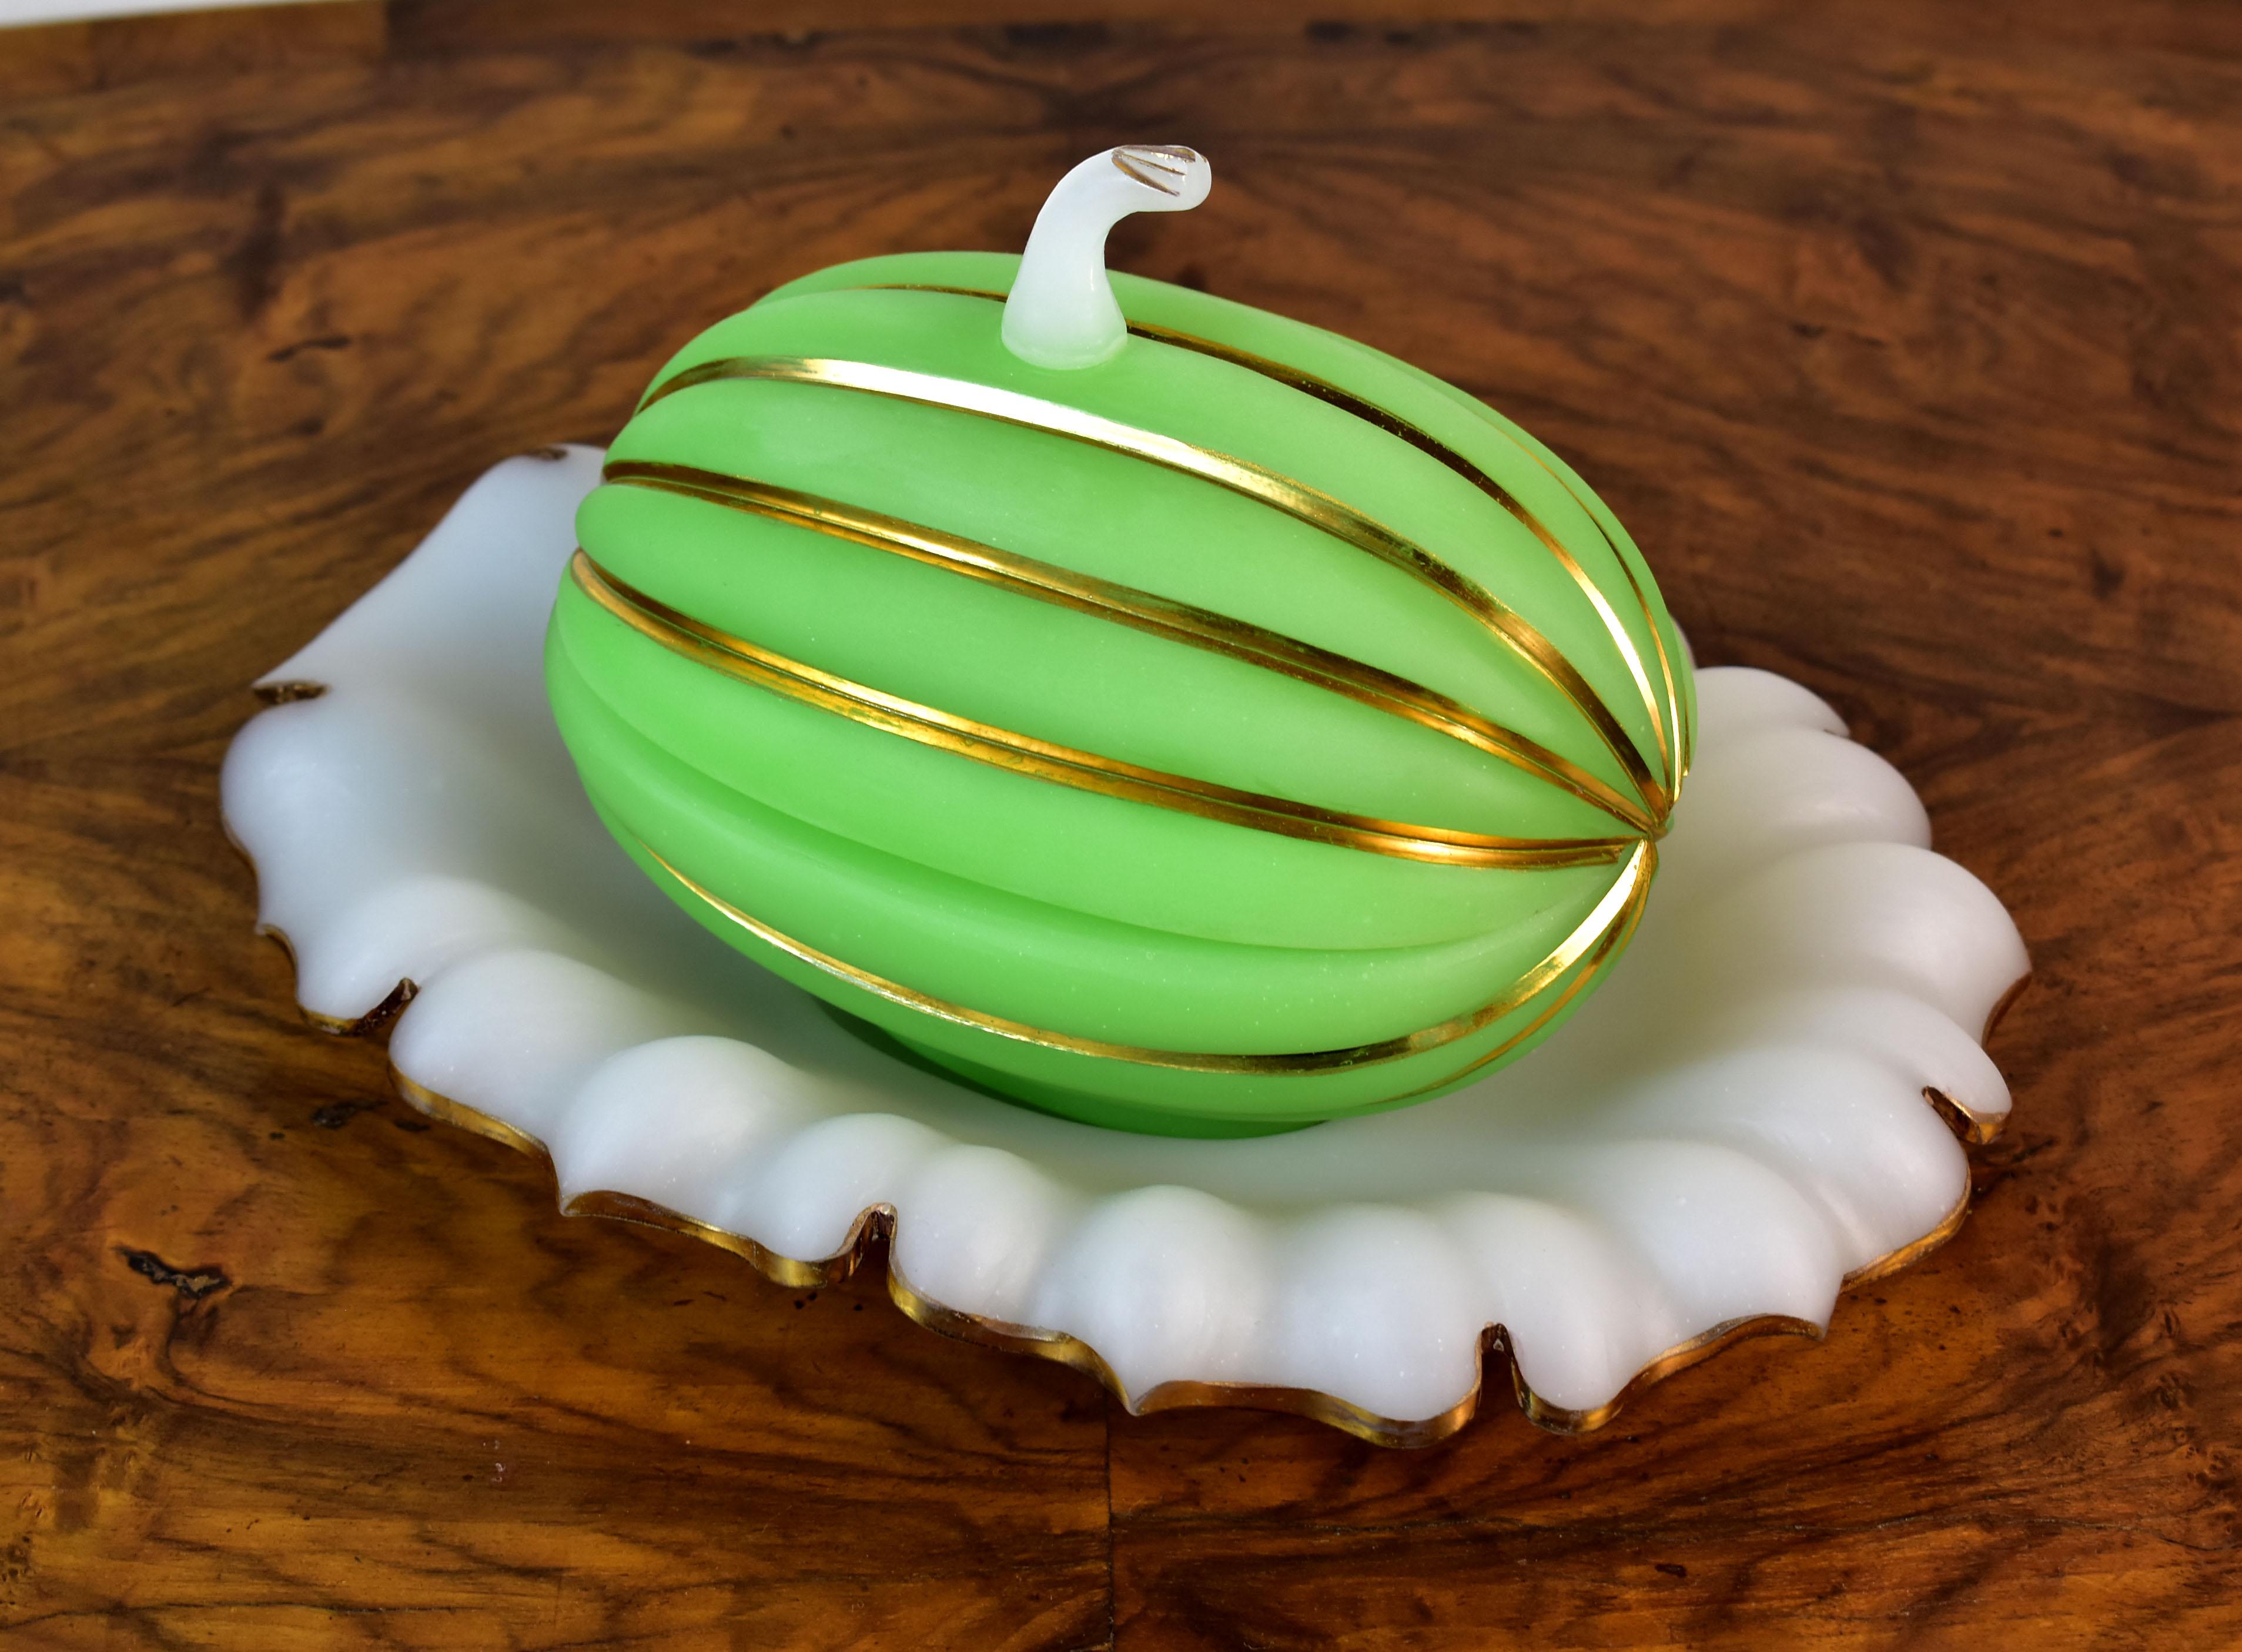 A beautiful and very interesting jar with a plate made of opaline glass in the shape of a pumpkin. The pumpkin-shaped jar is made of green opaline with a chip of white, all completed with gold painting. The plate is in the shape of a leaf, made of